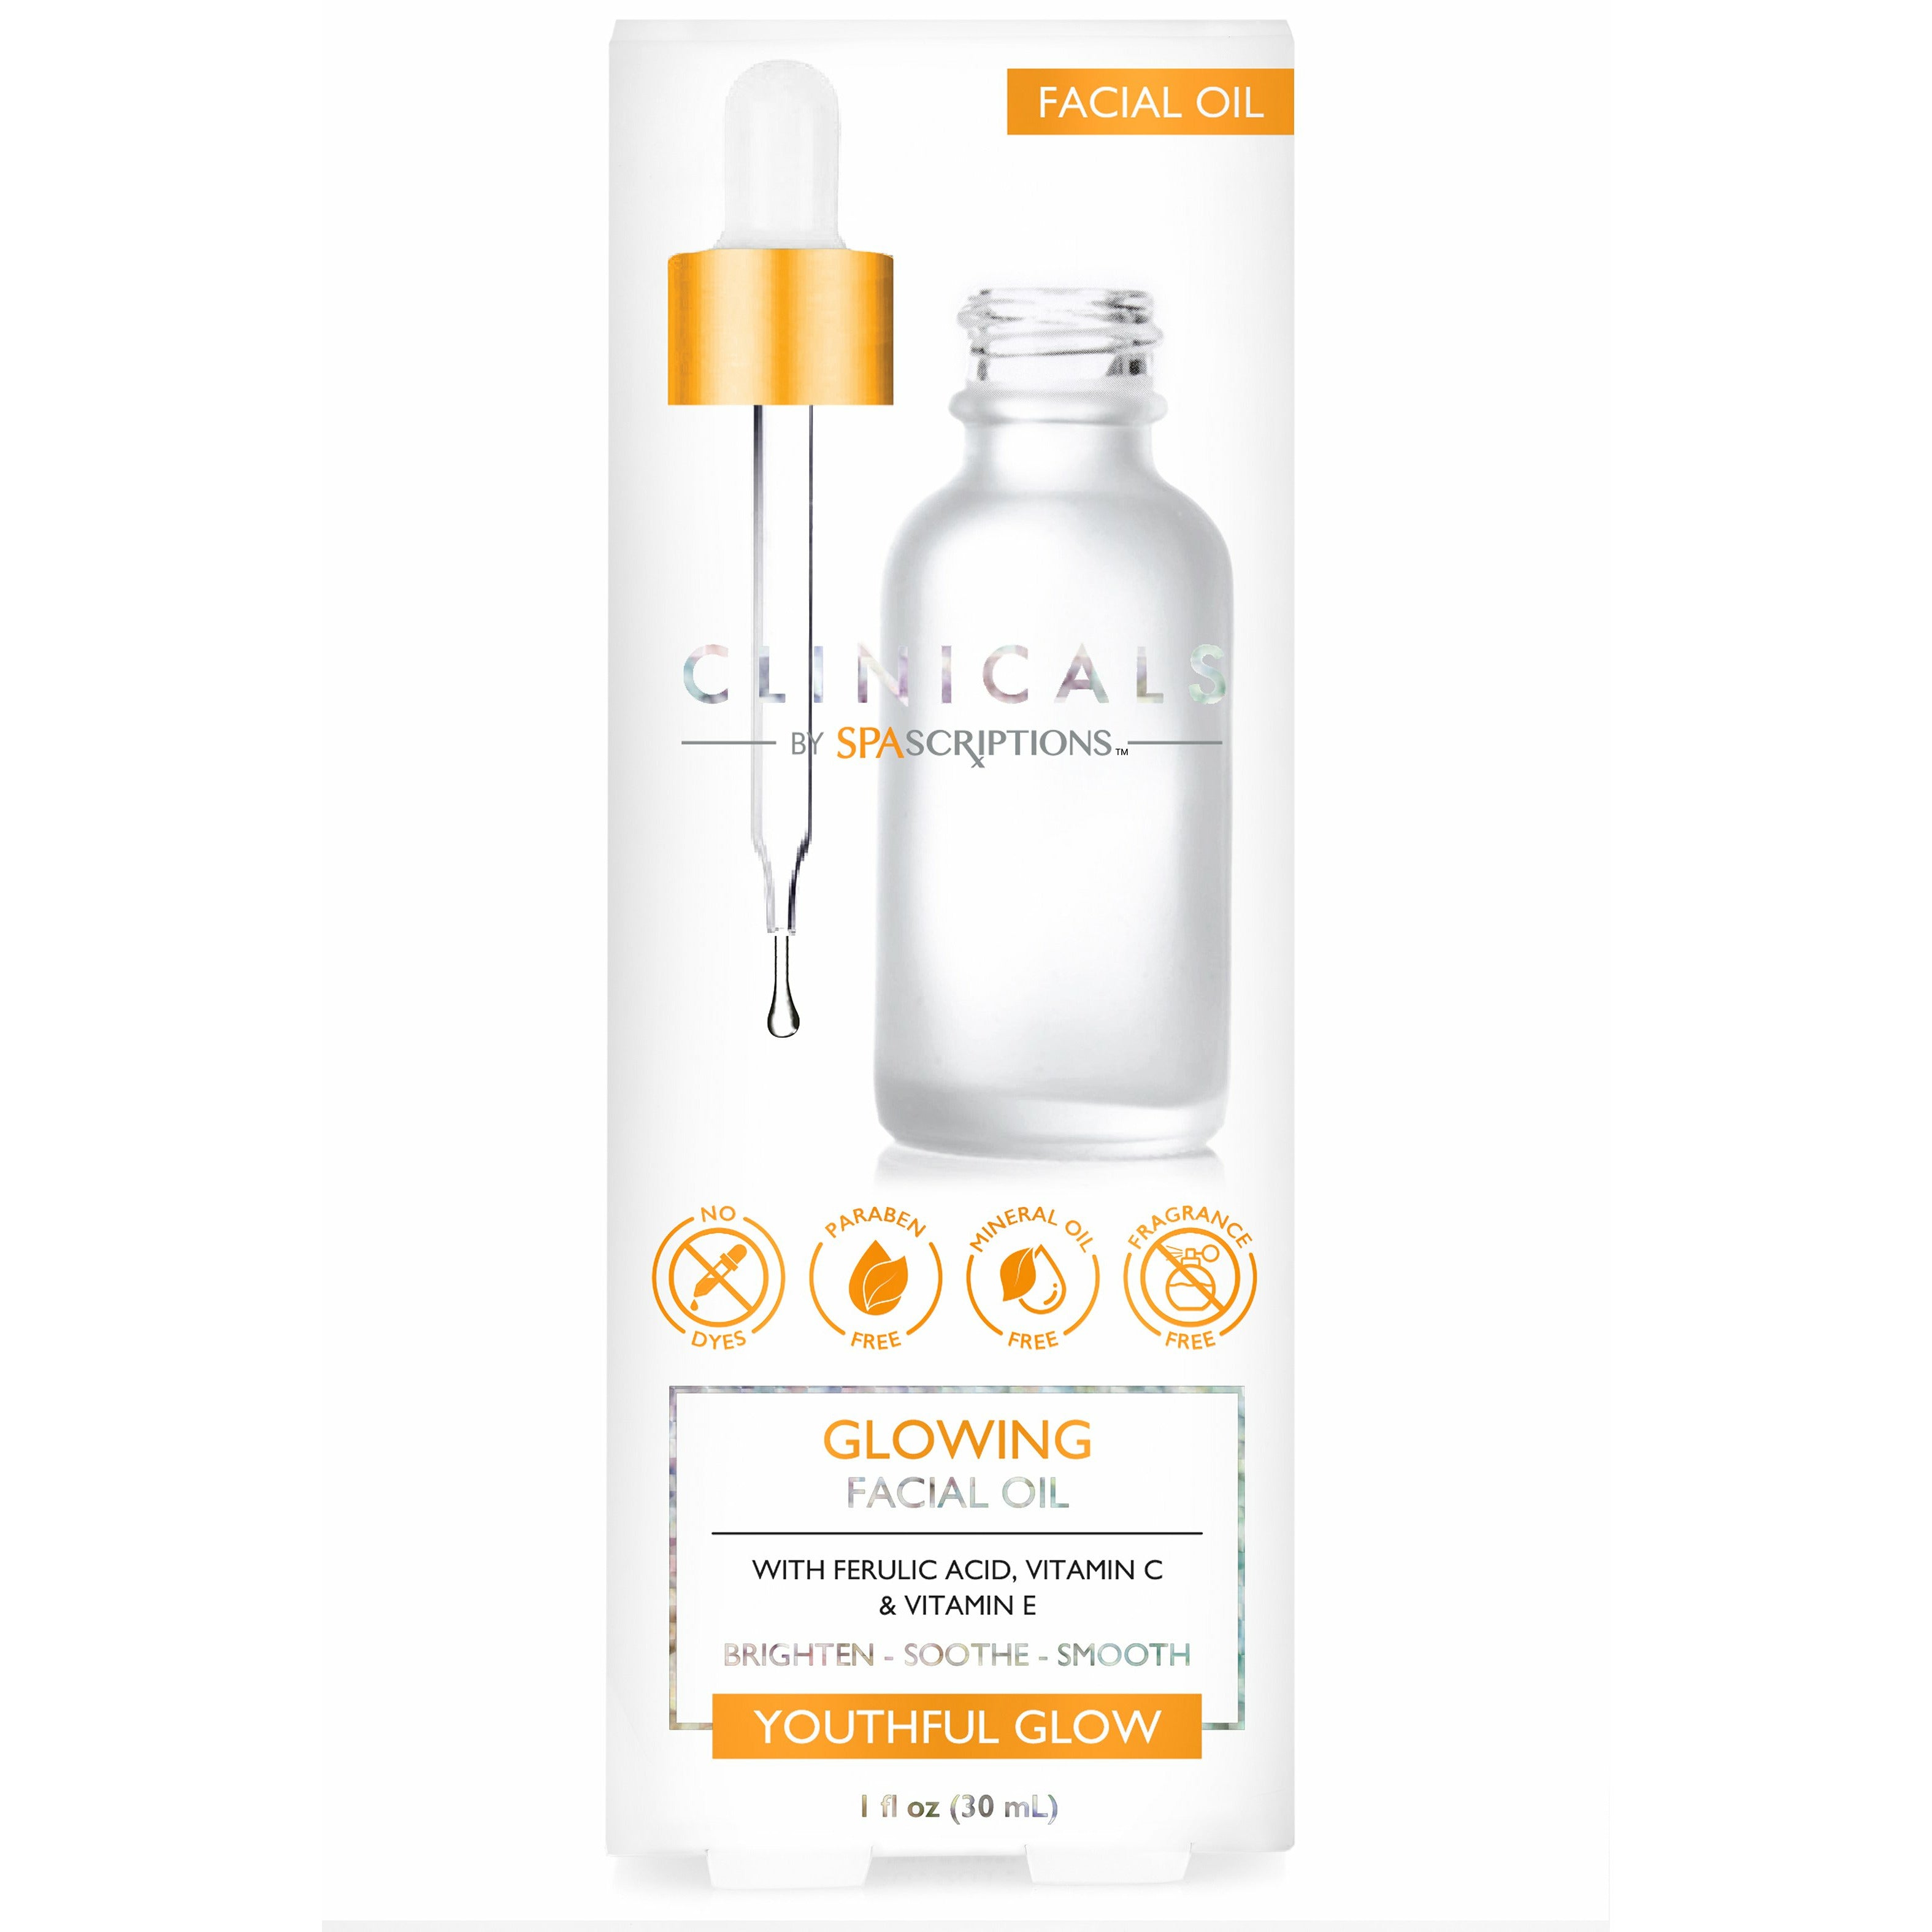 Clinicals Glowing Facial Oil